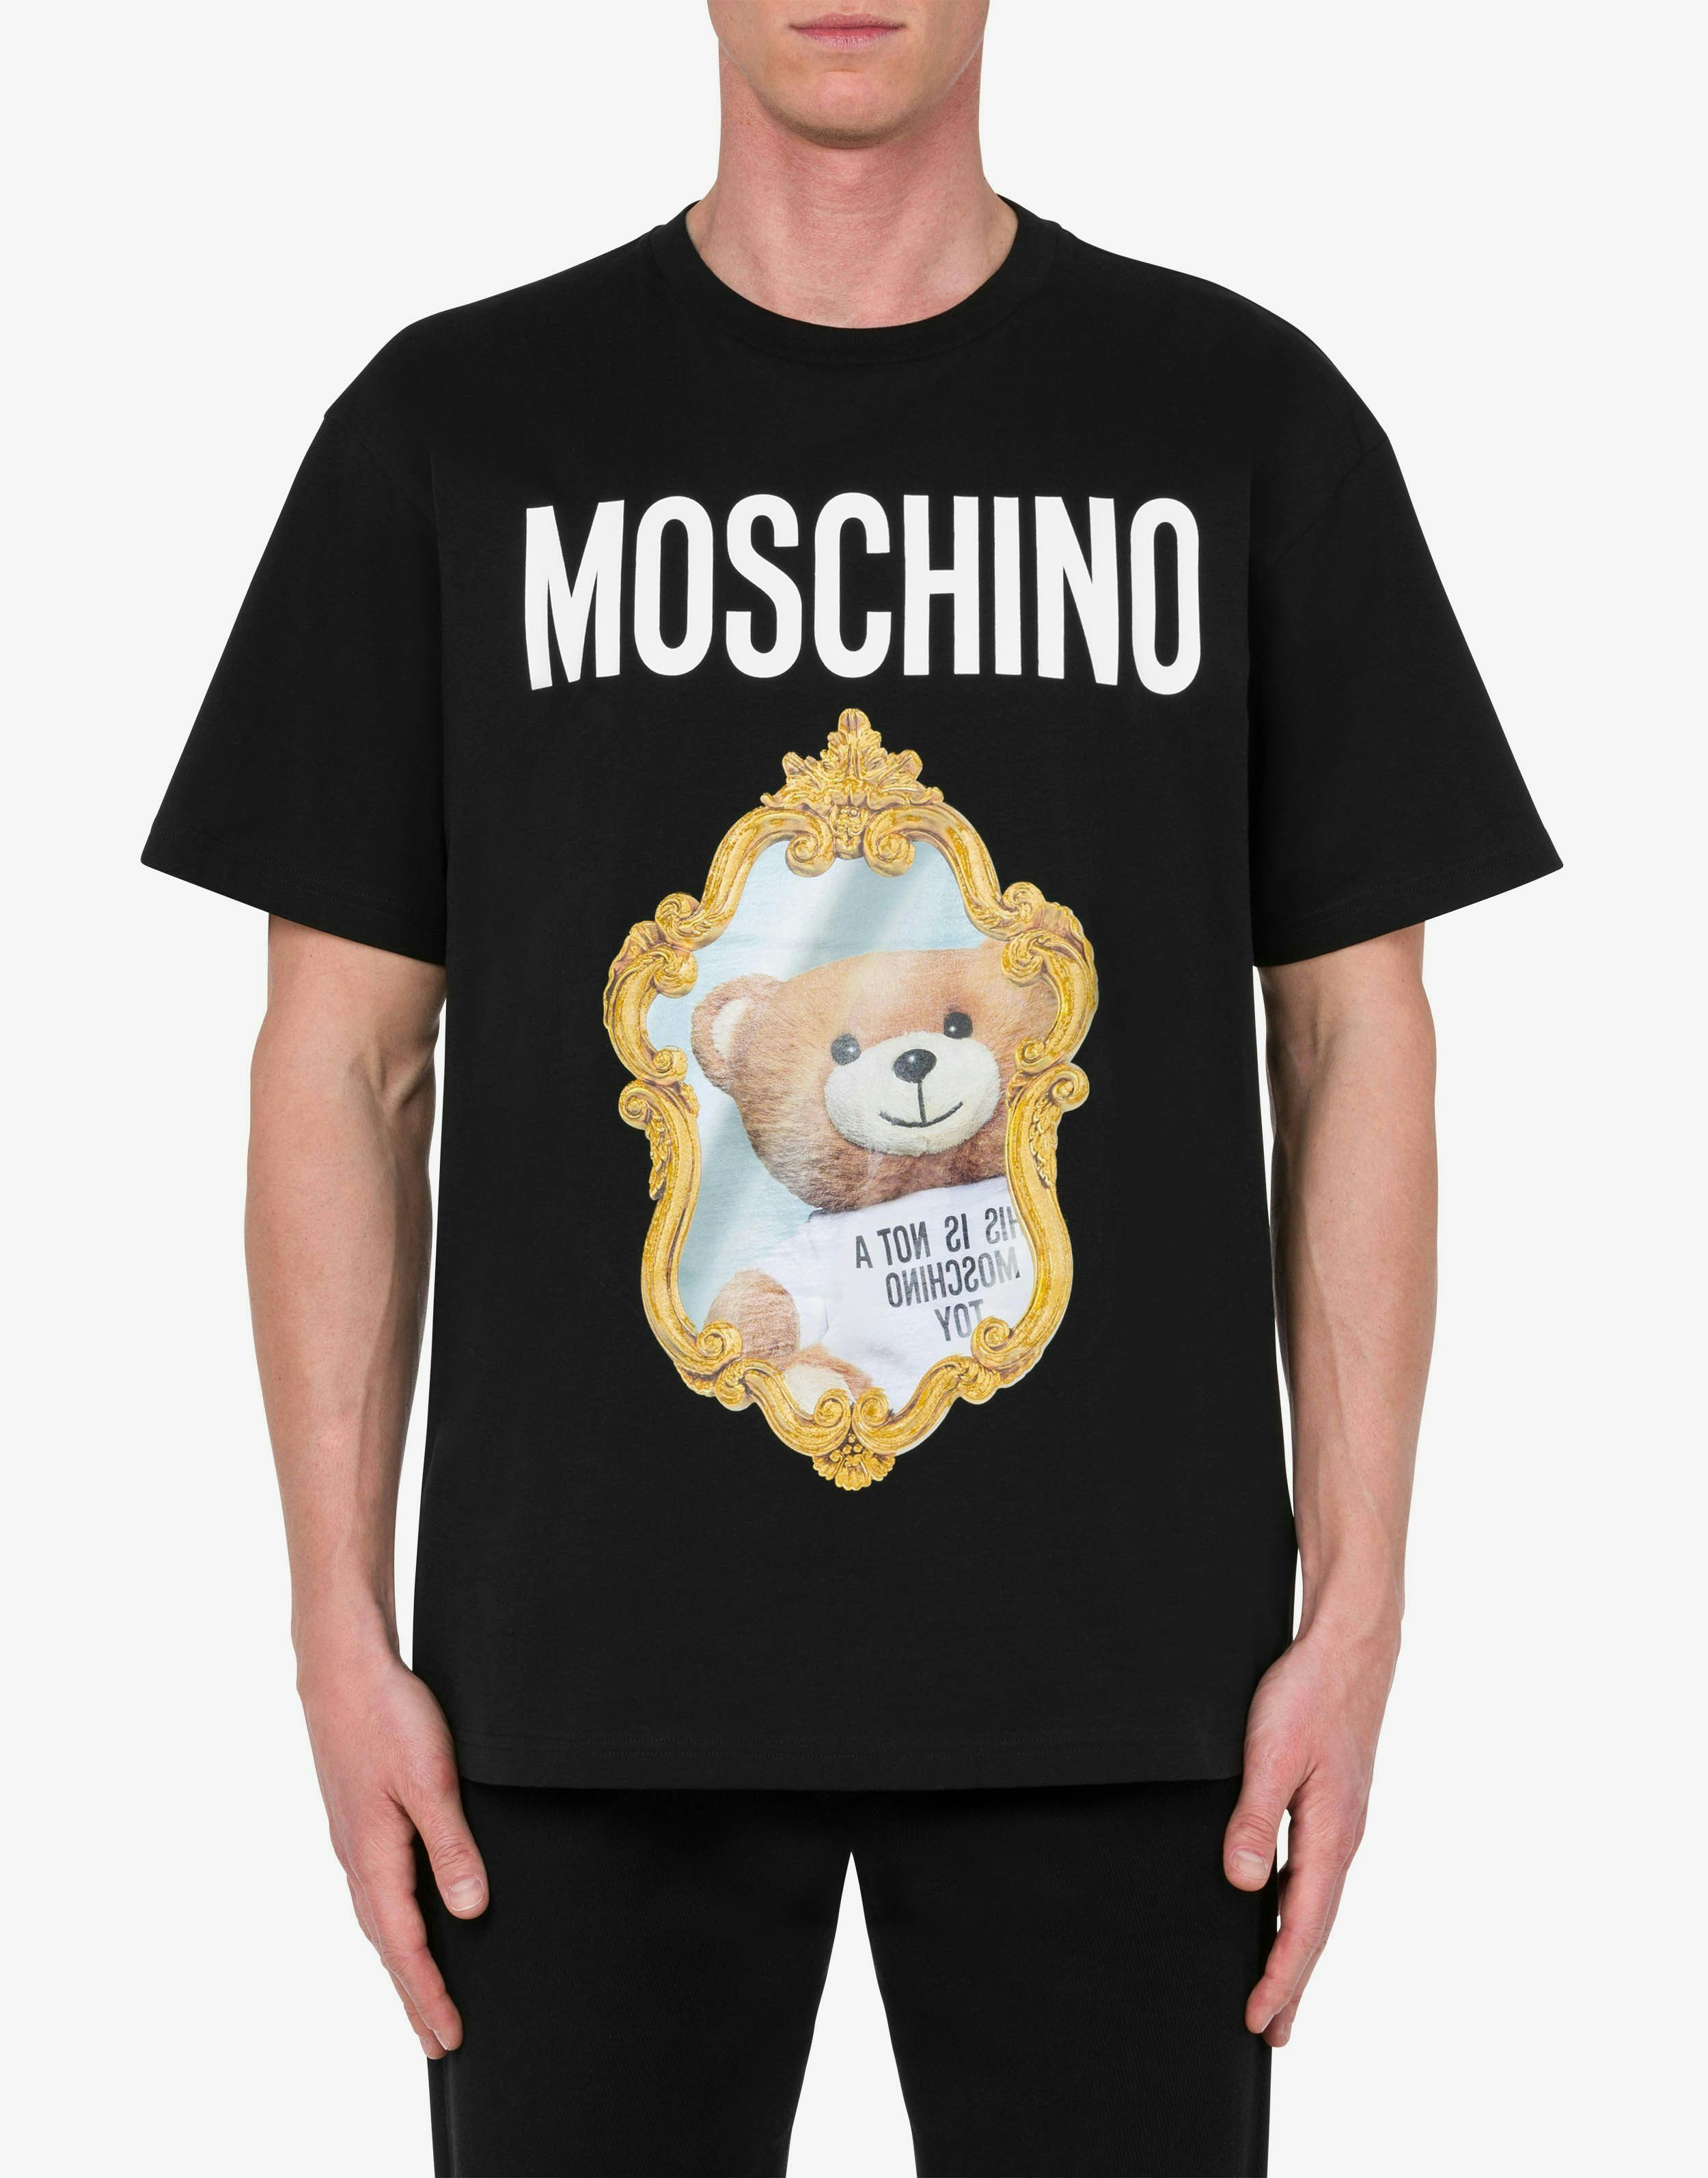 Moschino T-Shirts - Men Clothing | Moschino Official Store